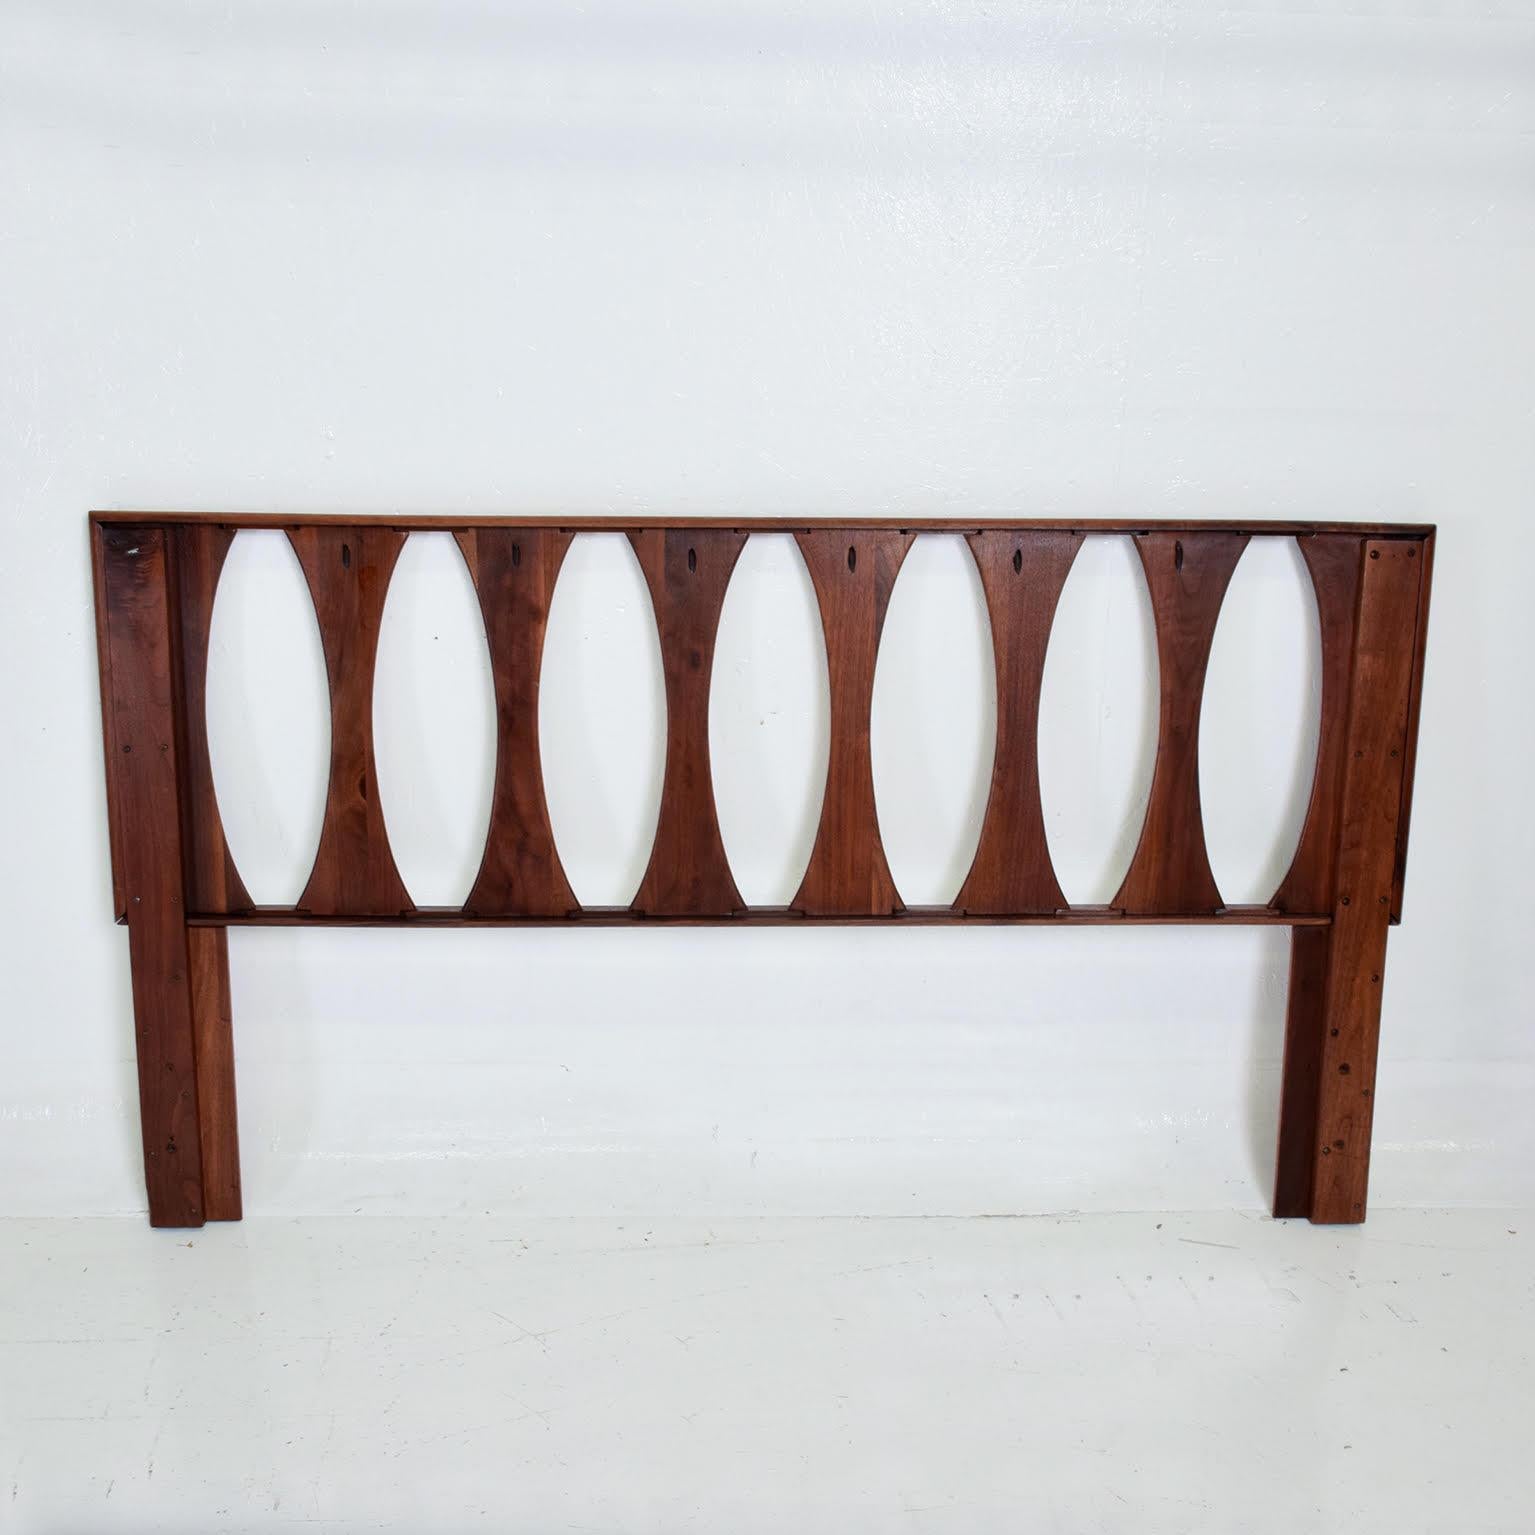 For your consideration, a Mid-Century Modern sculptural walnut headboard by Prelude.

Will fit a Queen size mattress.

The USA, circa 1960s.

Solid walnut wood. 

Dimensions: 64